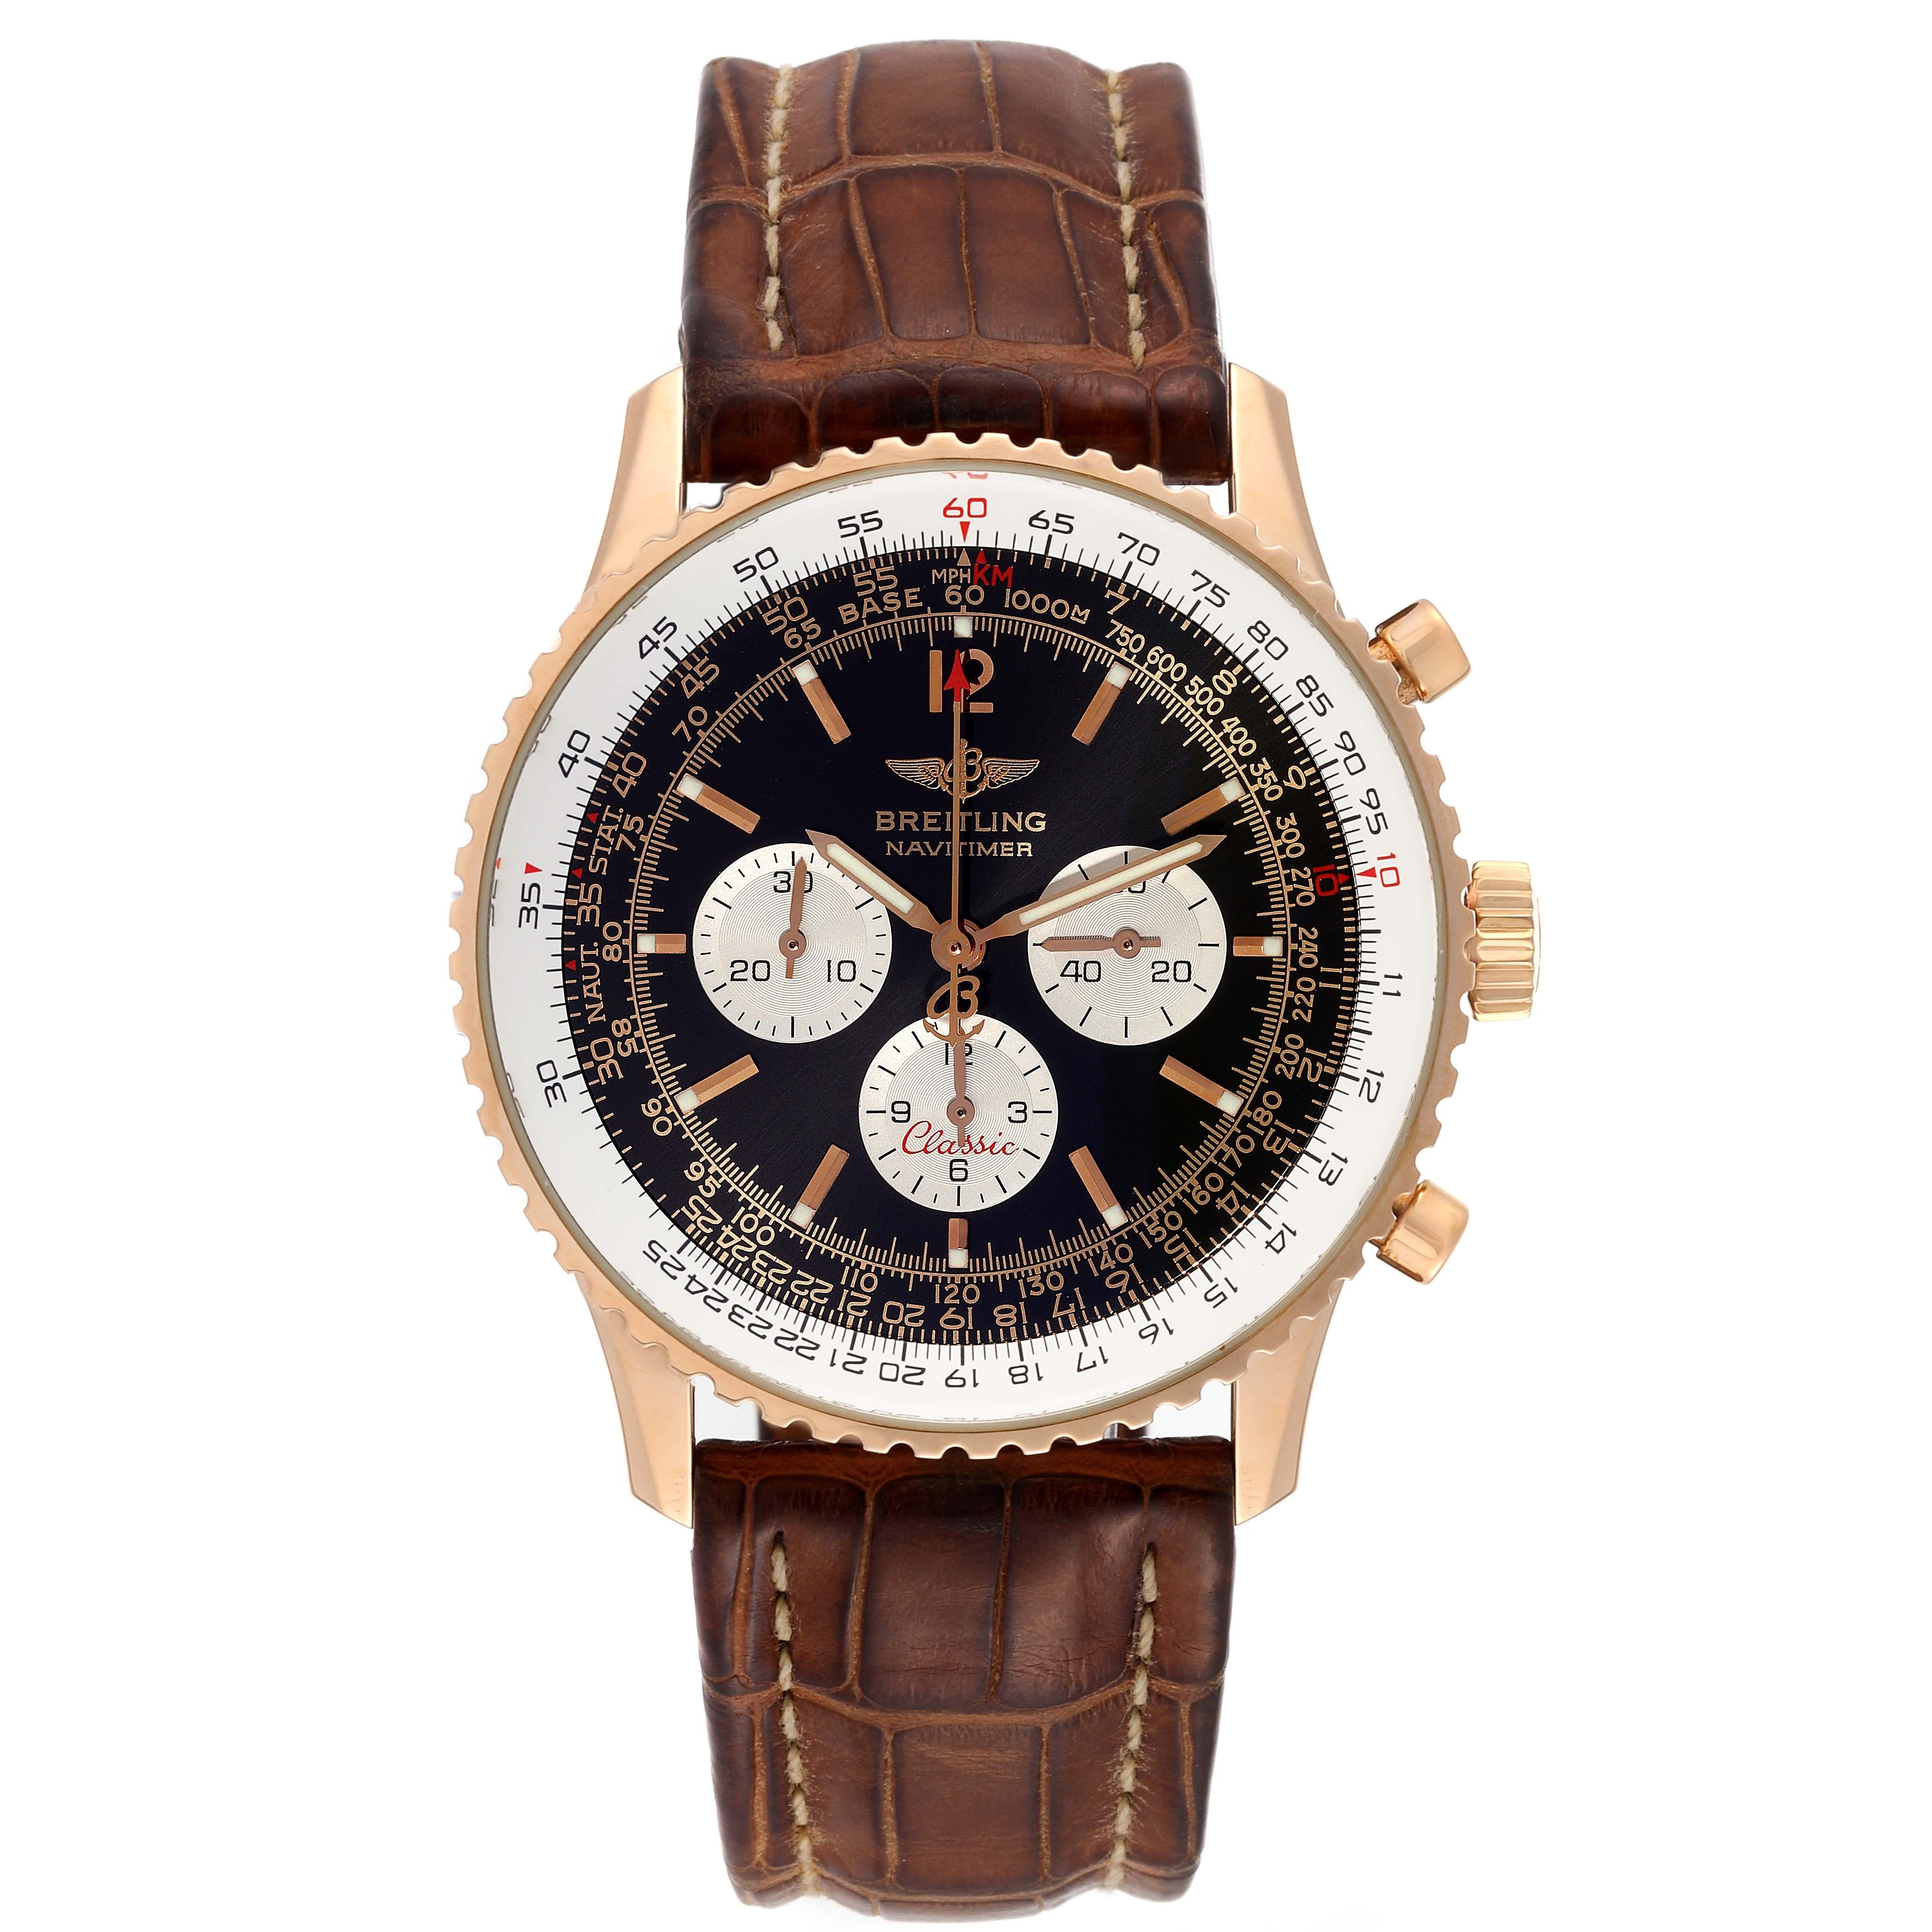 Breitling Navitimer Classic LE Rose Gold Mens Watch H30330 Box Papers. Automatic self-winding officially certified chronometer movement. 18K rose gold case 41.0 mm in diameter. 18K rose gold push-down crown and pushers. 18K rose gold bidirectional